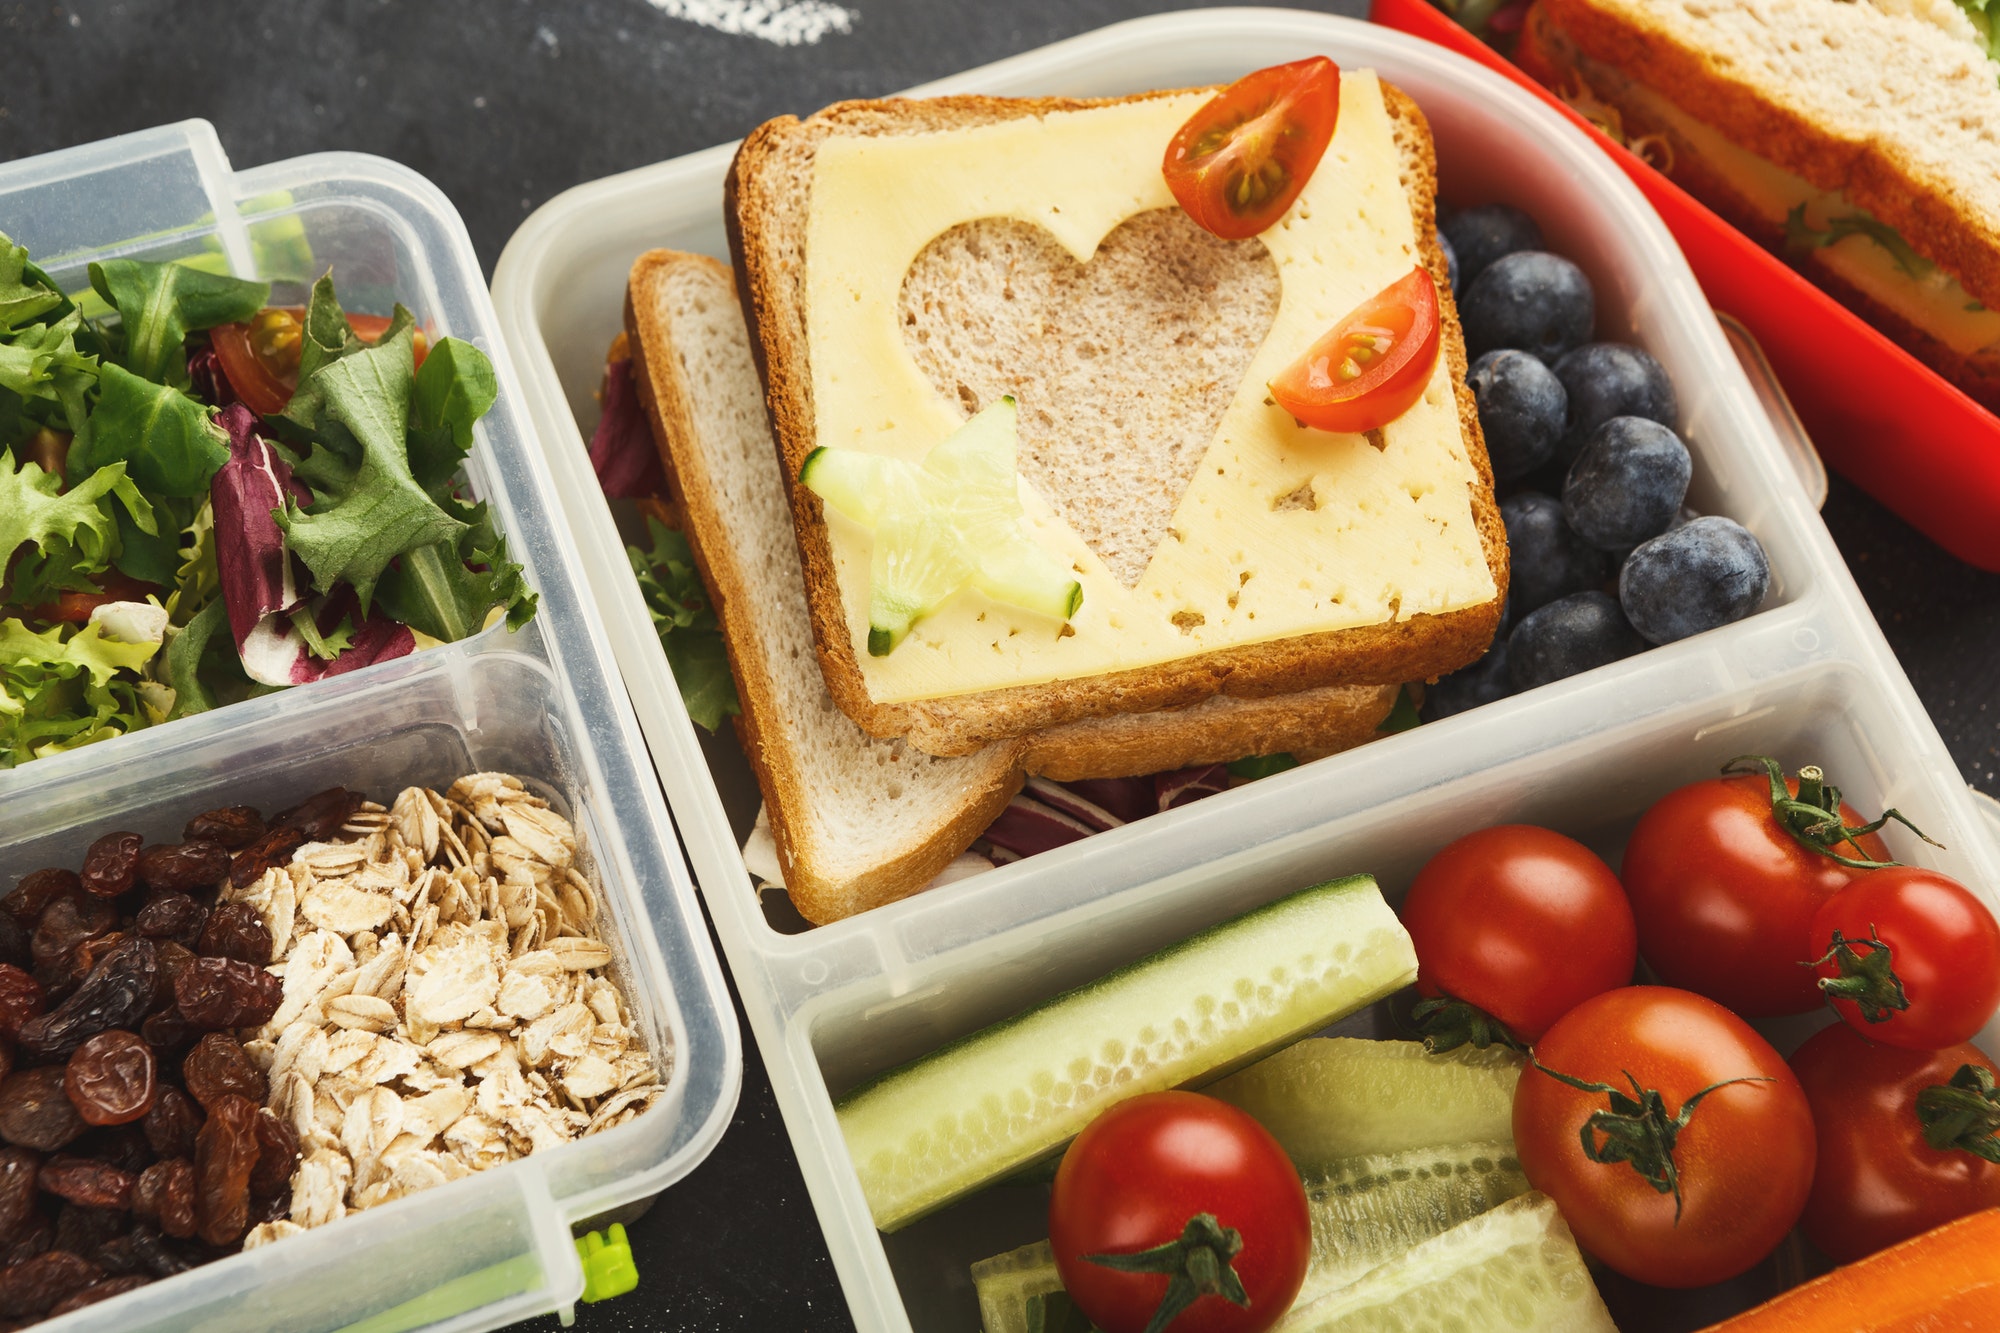 Lunch boxes for kid. Healthy snack for school dinner